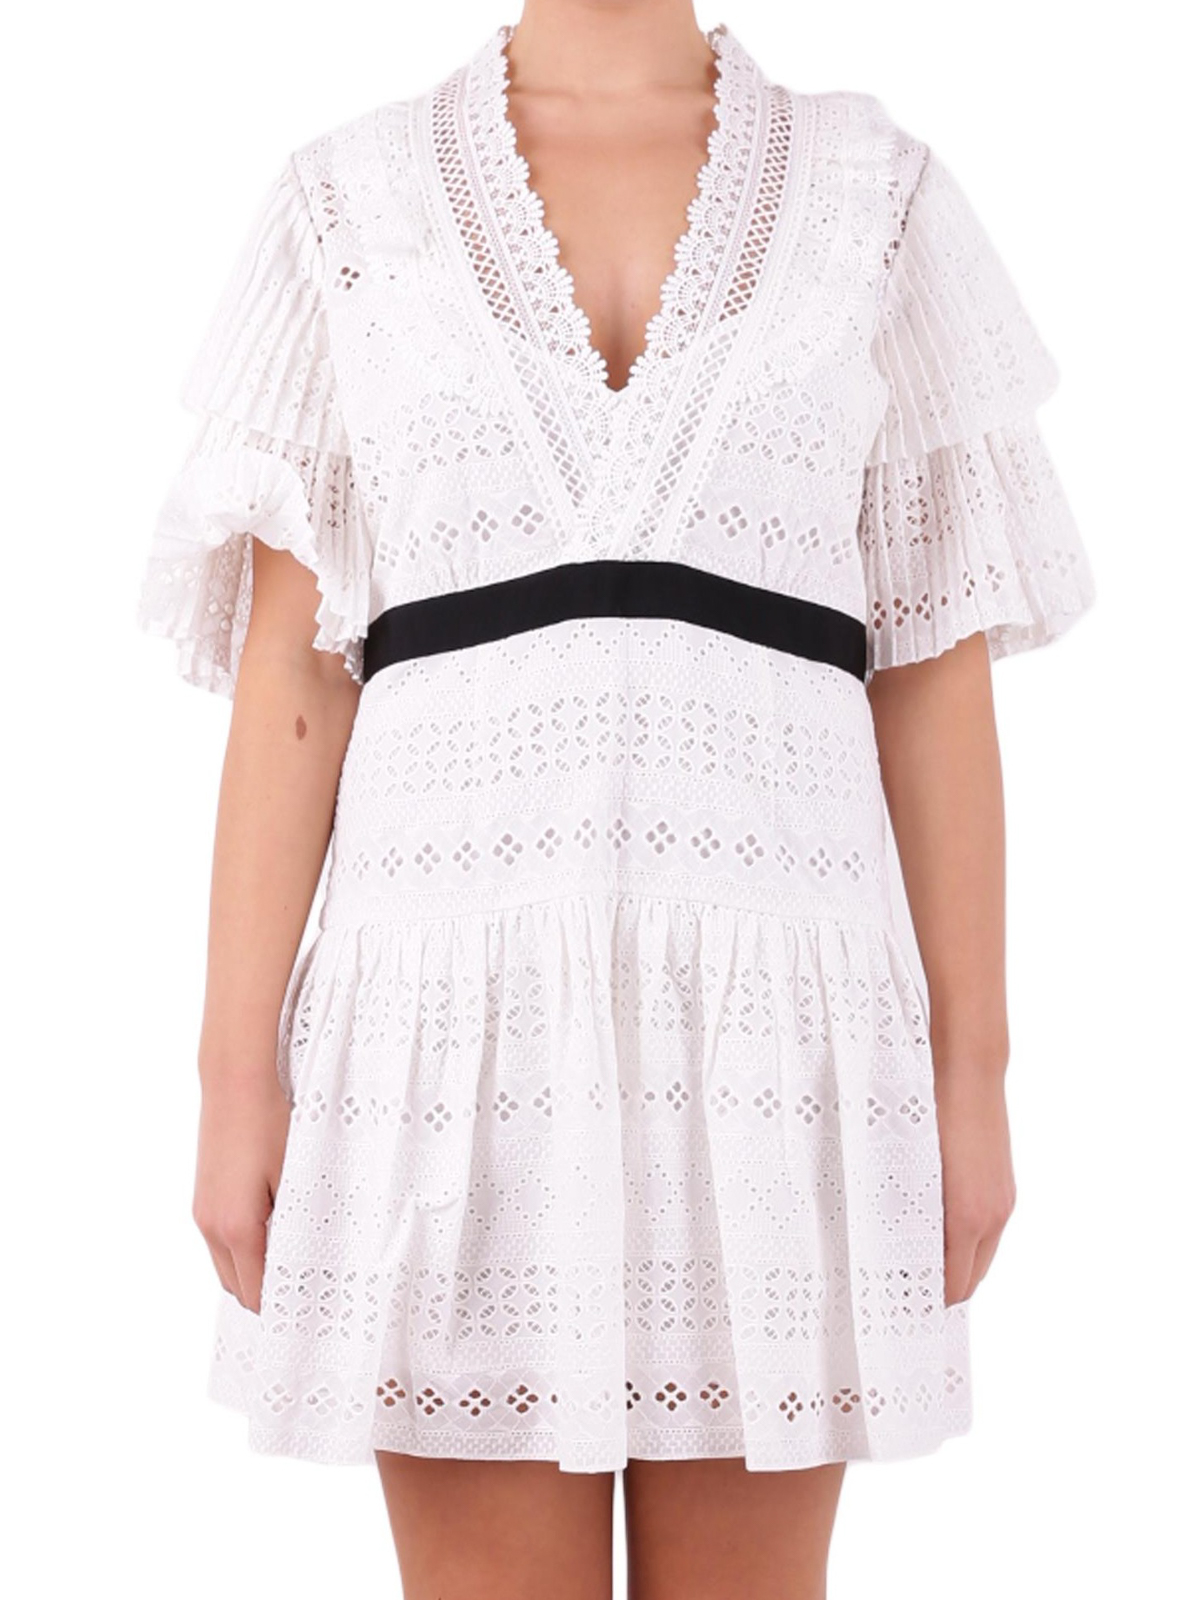 white dress broderie anglaise